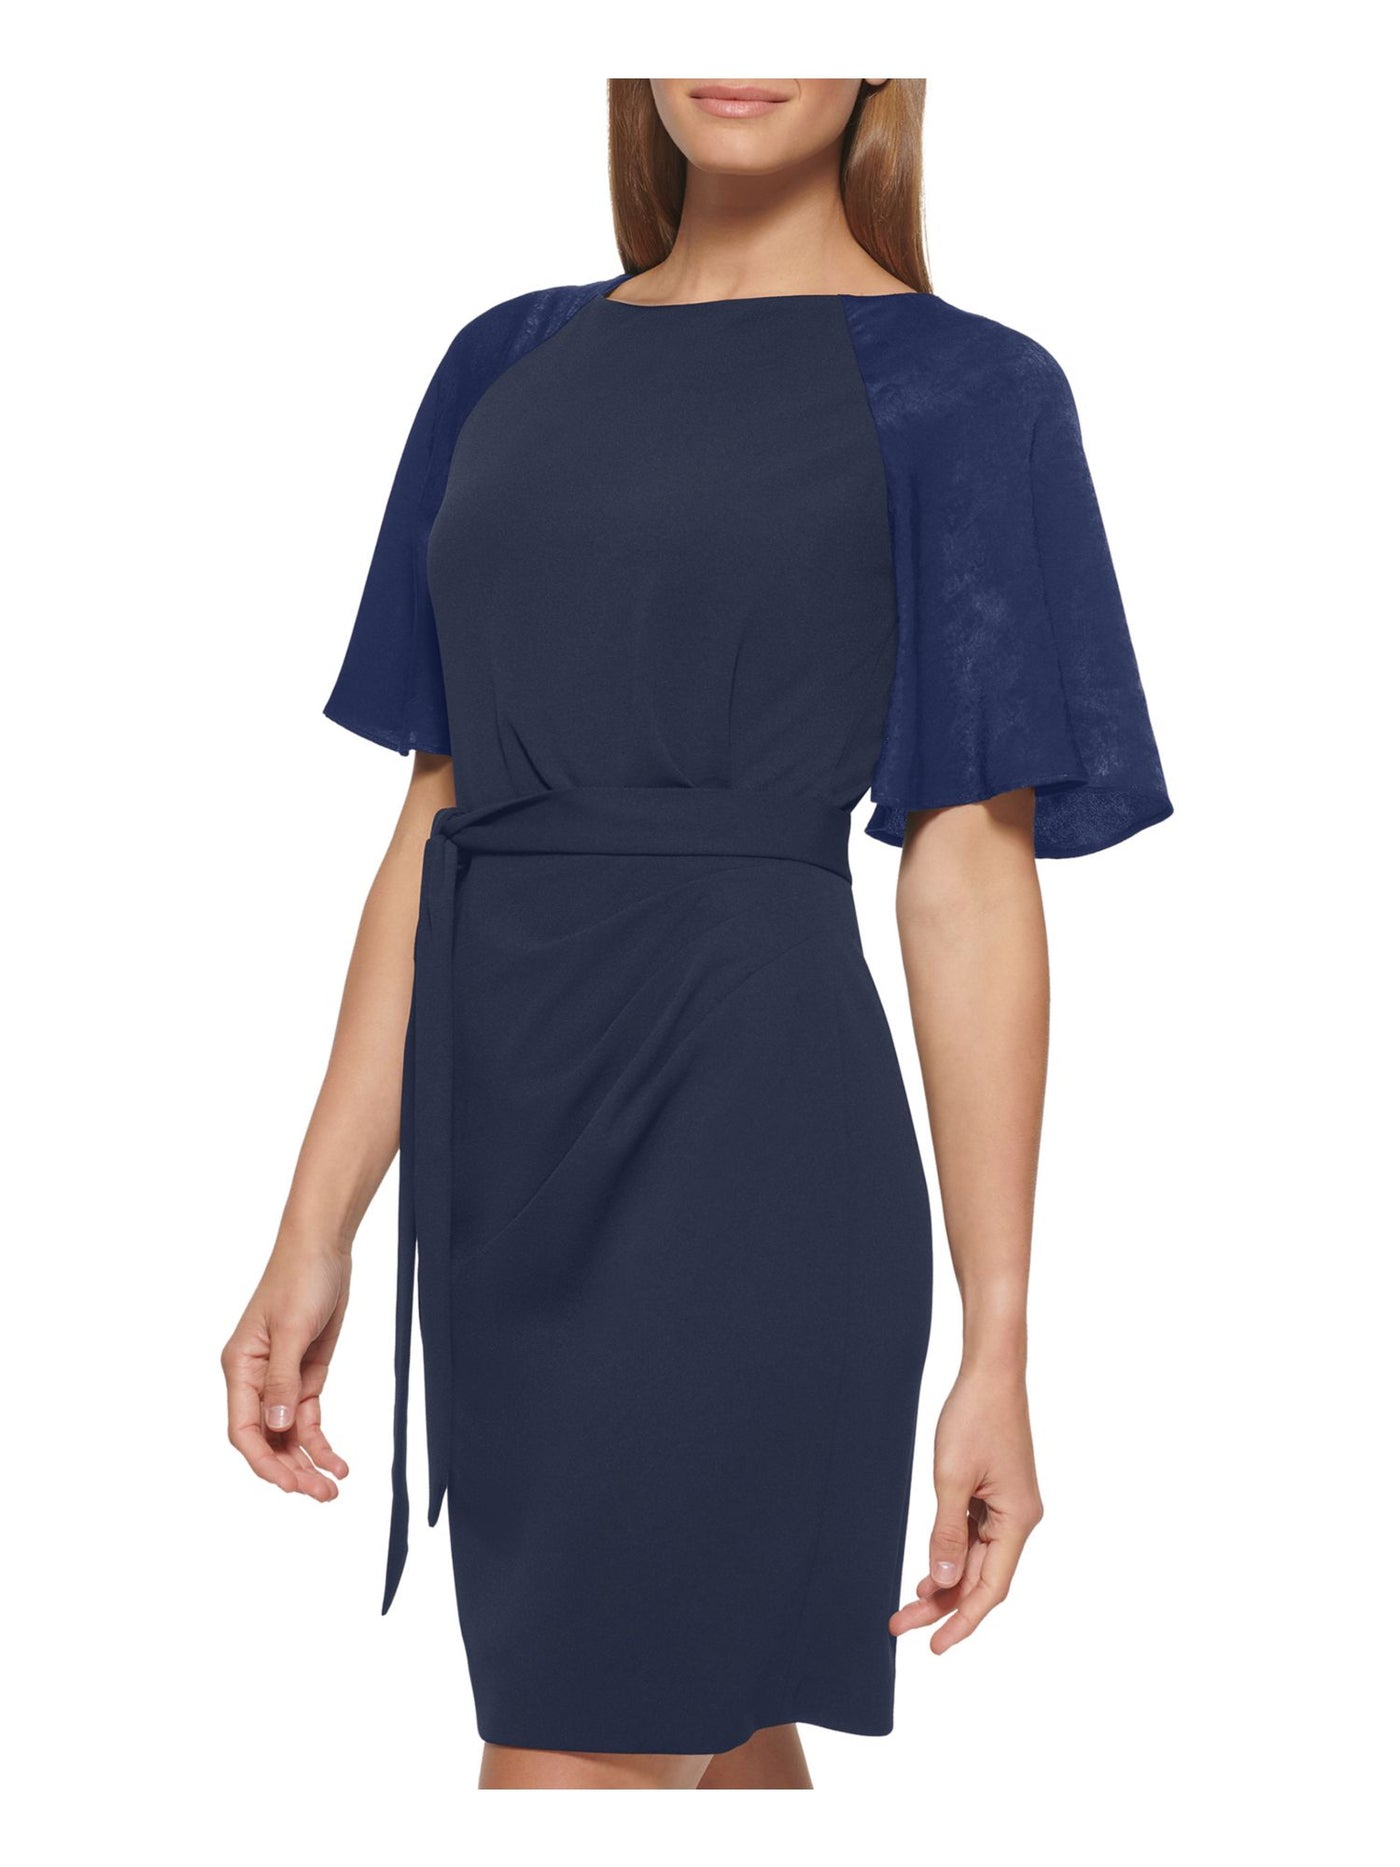 DKNY Womens Navy Zippered Belted Flutter Sleeve Crew Neck Above The Knee Wear To Work Sheath Dress 6